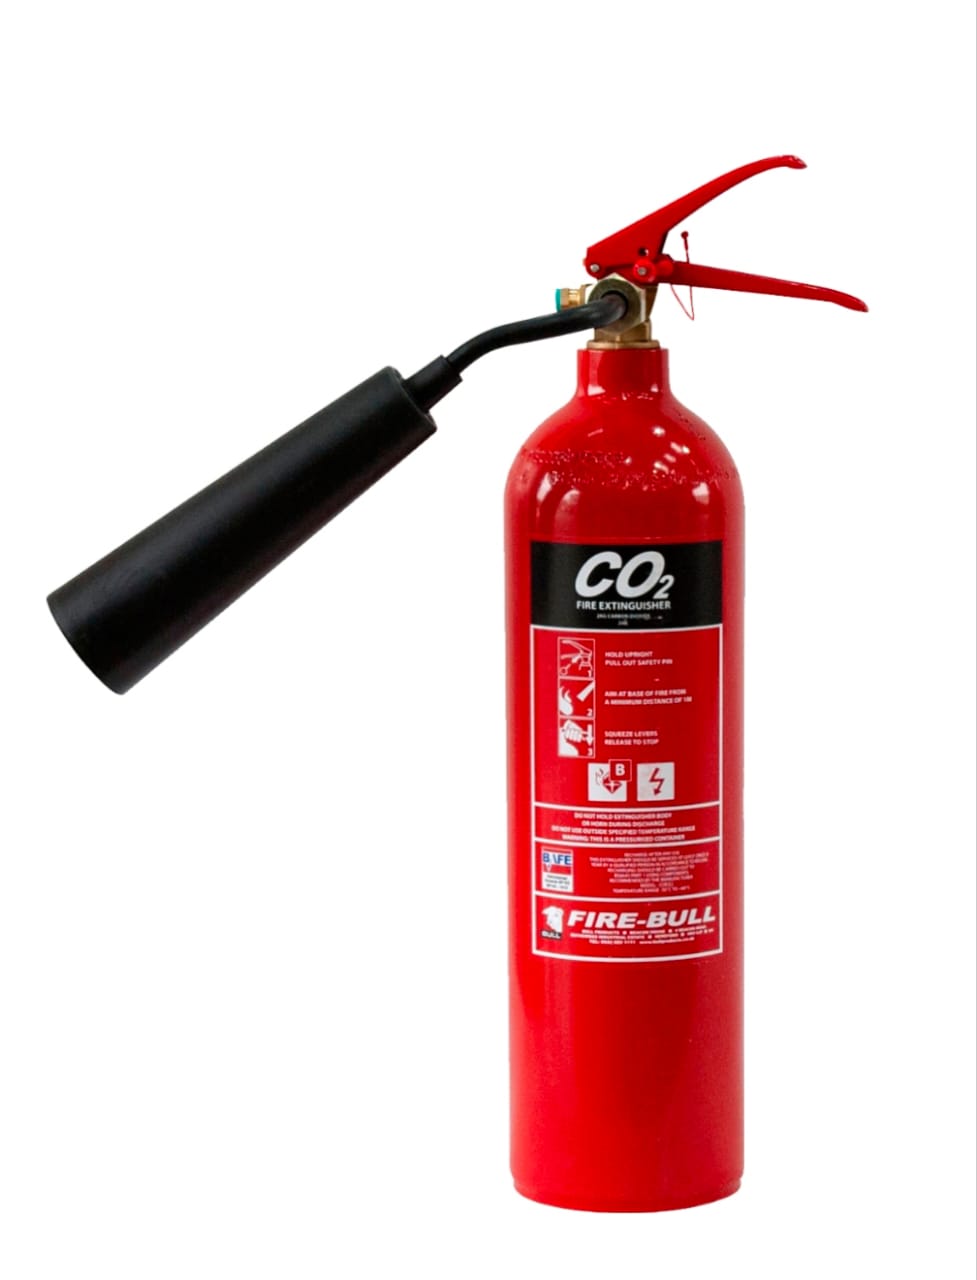 Fire-Bull CO2 Fire Extinguisher from Satyam fire and safety solutions